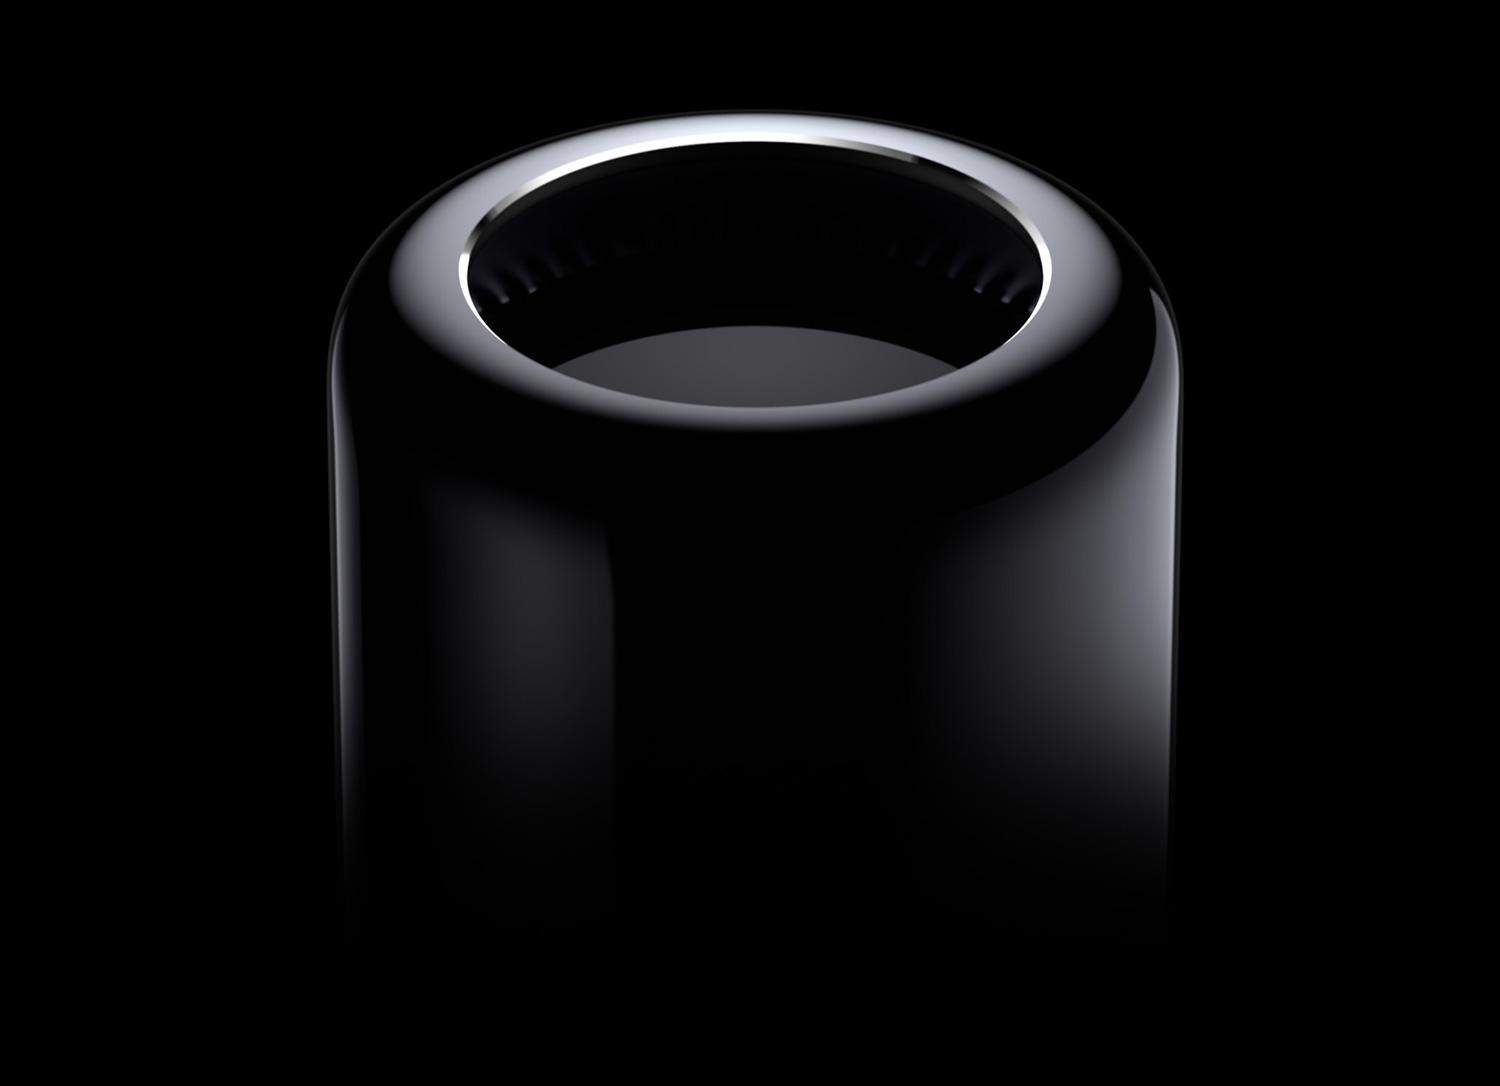 The Mac Pro is now slightly better.